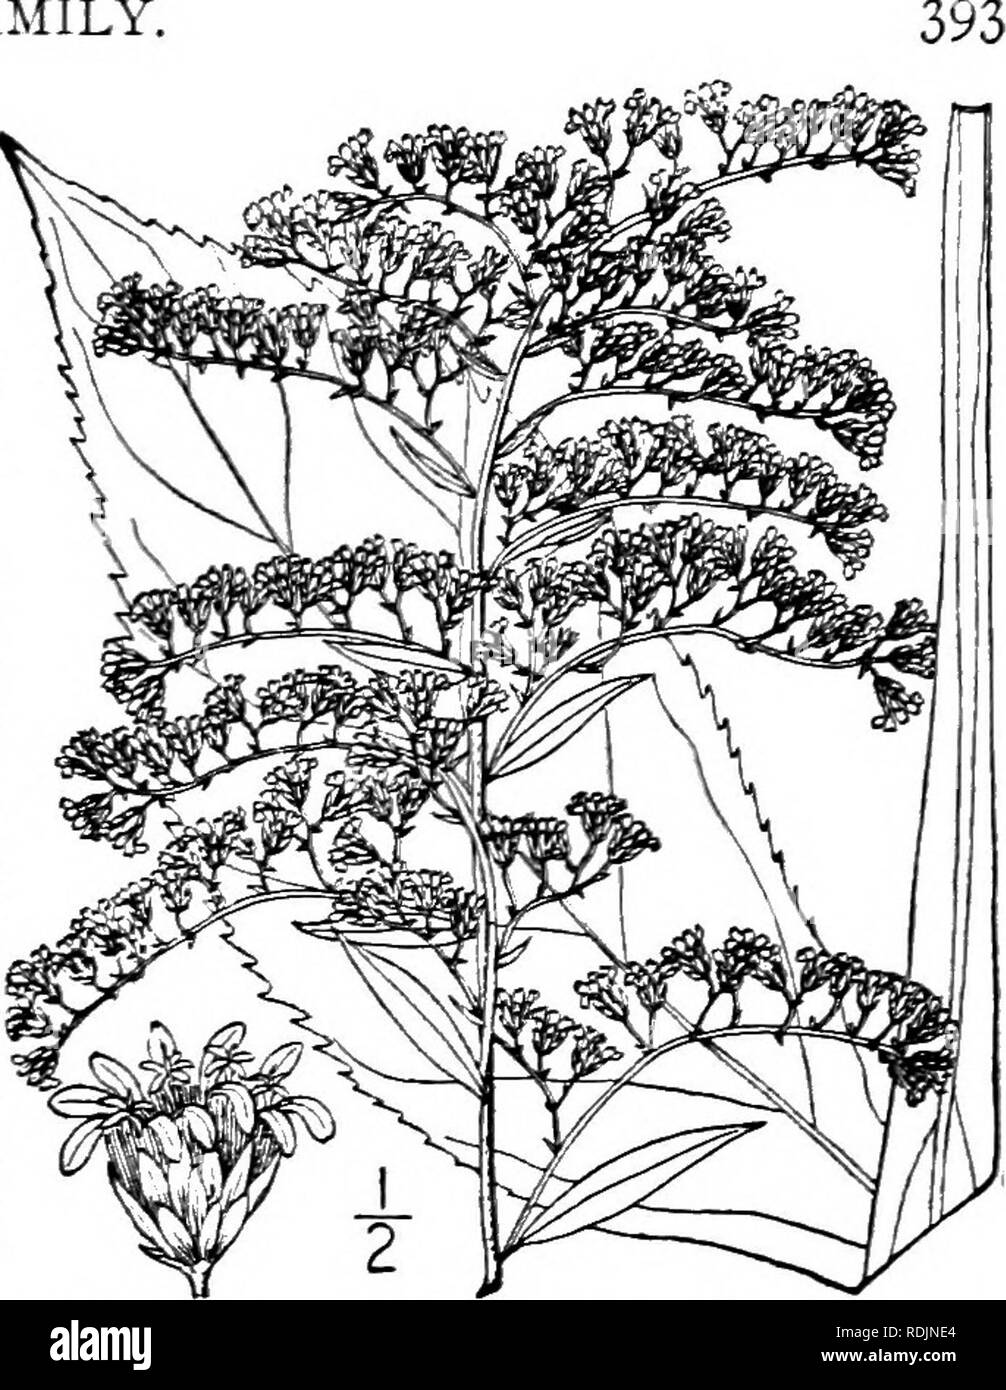 . An illustrated flora of the northern United States, Canada and the British possessions, from Newfoundland to the parallel of the southern boundary of Virginia, and from the Atlantic Ocean westward to the 102d meridian. Botany; Botany. Genus 22. THISTLE FAMILY. 34. Solidago juncea Ait. Early or Sharp- toothed Golden-rod. Fig. 4246. Solidago juncea Ait. Hort. Kew. 3: 213. 1789. S. arguta scabrella T. &amp; G. Fl. N. A. 2: 214. 1841. Solidago juncea scabrella A. Gray, Syn. Fl. 2 : Part 2, 155. 1884. Solidago juncea ramosa Porter &amp; Britton, Bull. Torr. Club 18: 368. 1891. Stem glabrous, or v Stock Photo